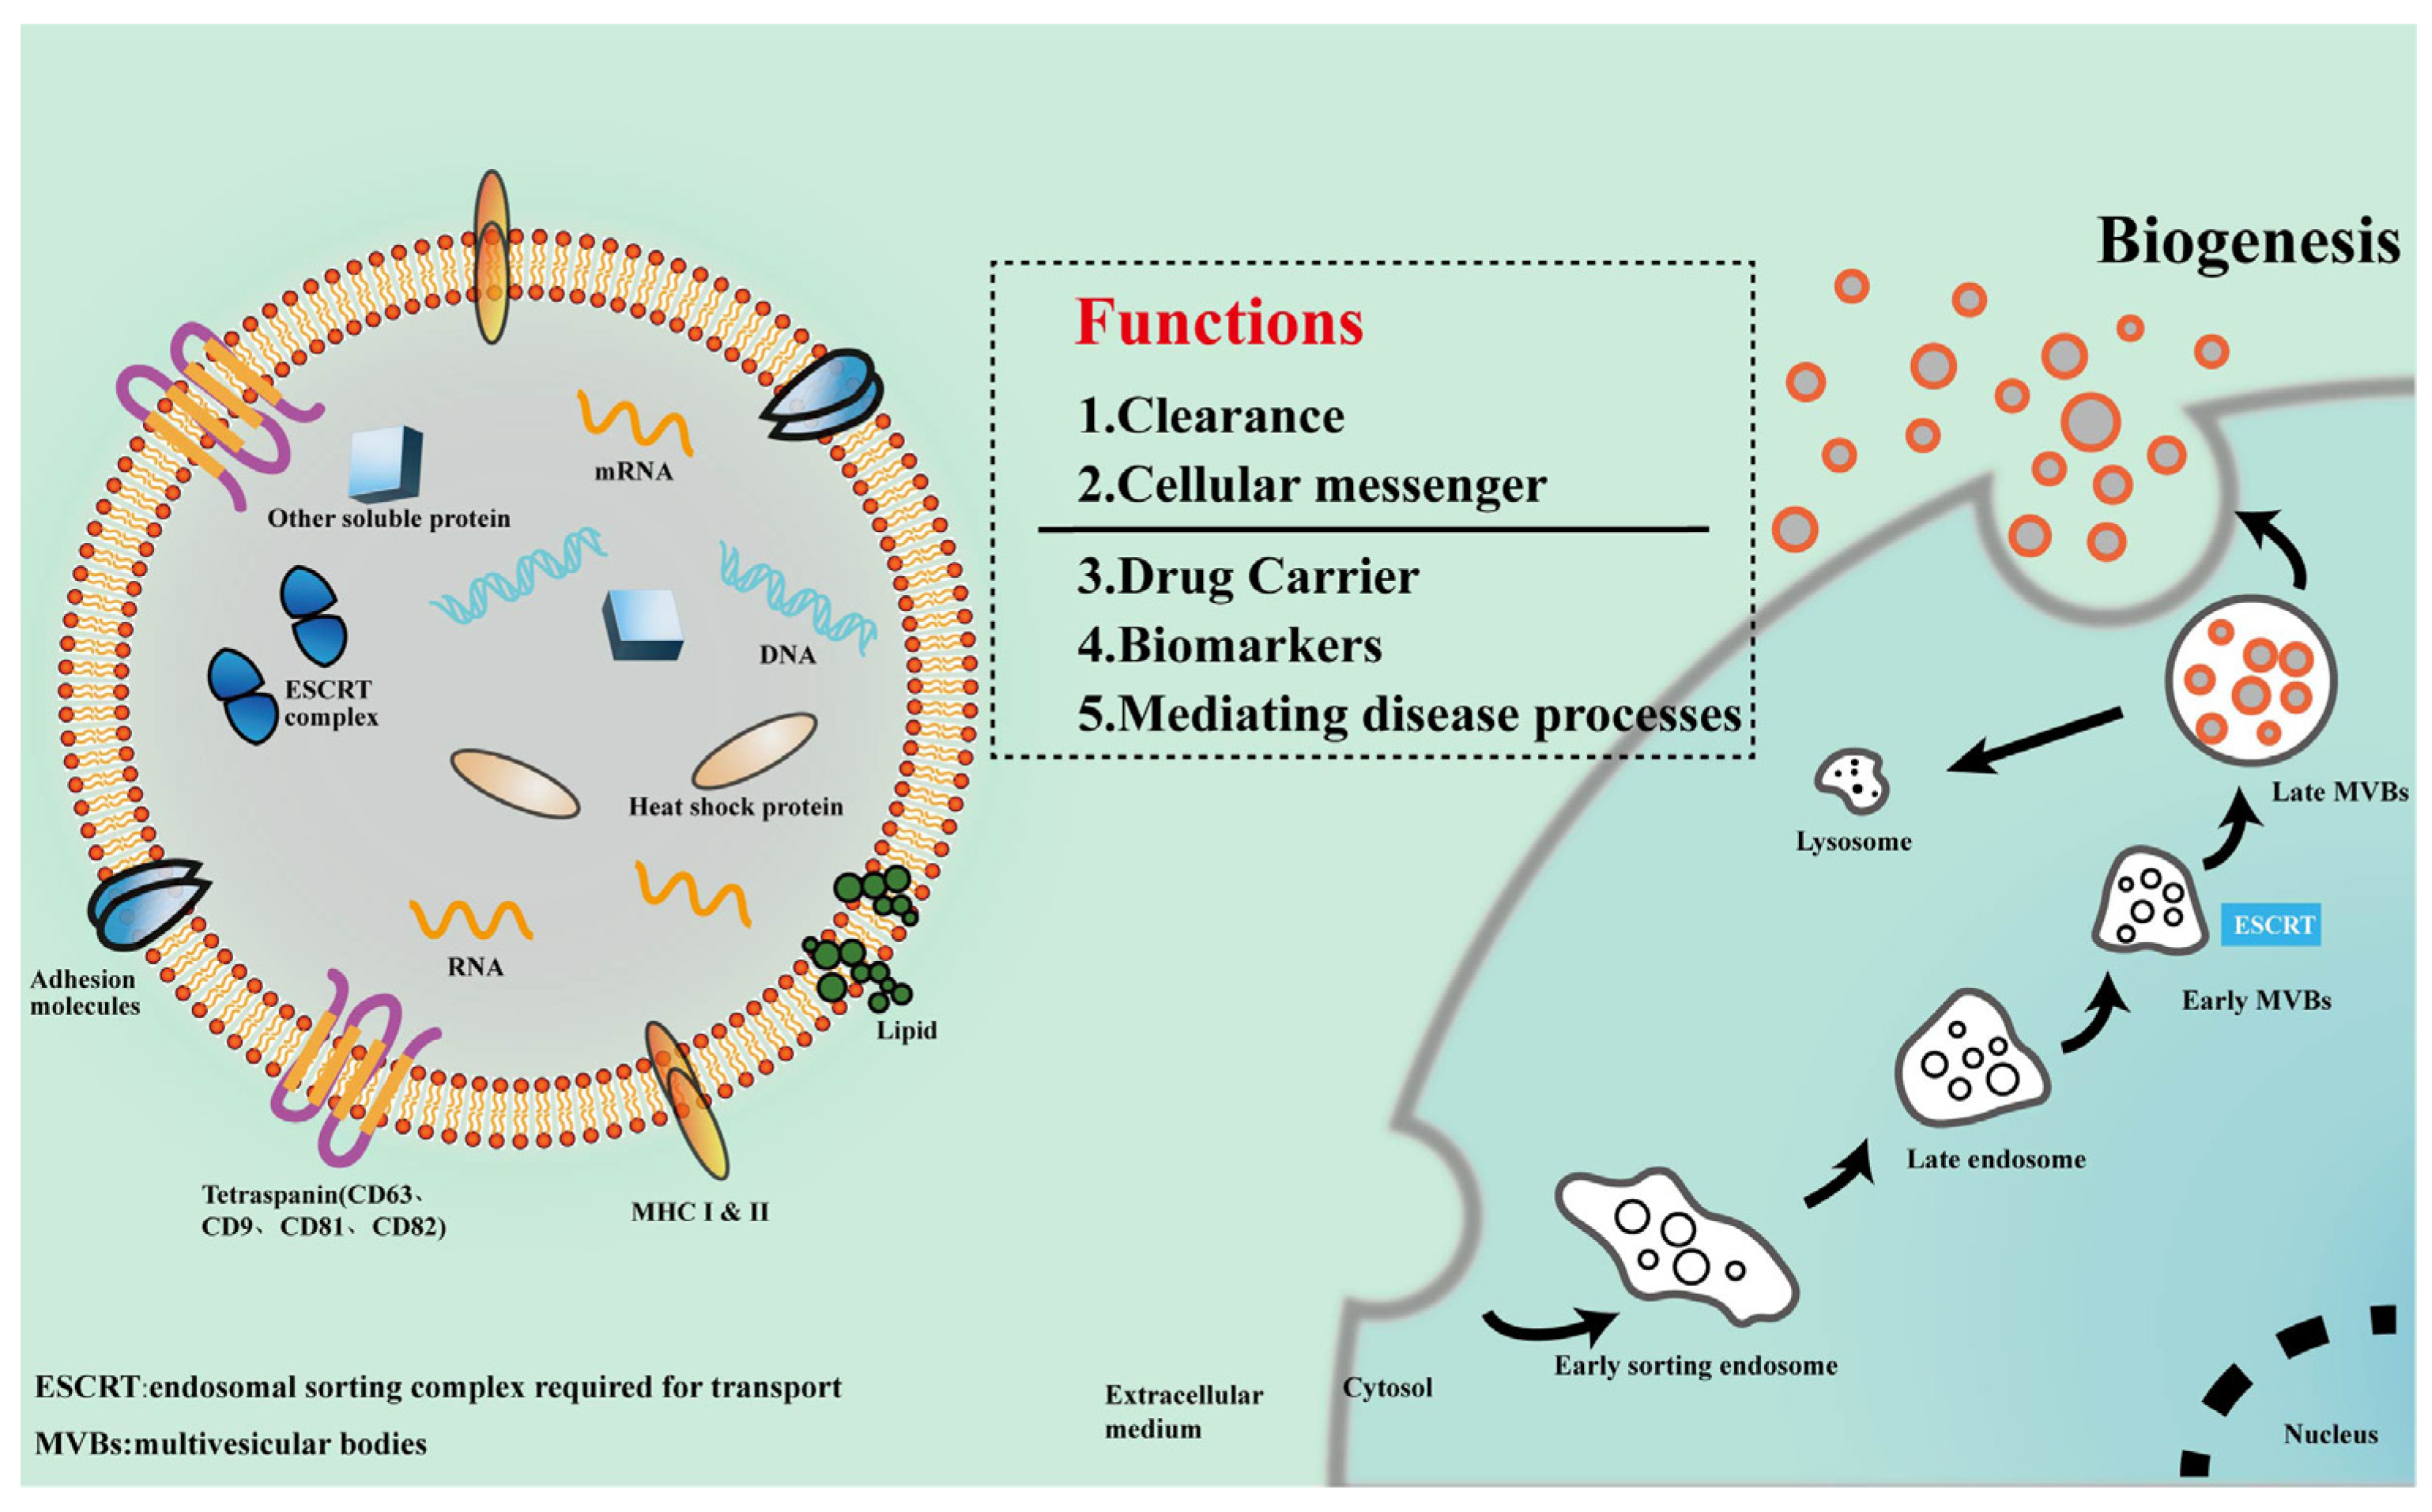 Natural Bioactive Molecules as Neuromedicines for the Treatment/Prevention  of Neurodegenerative Diseases